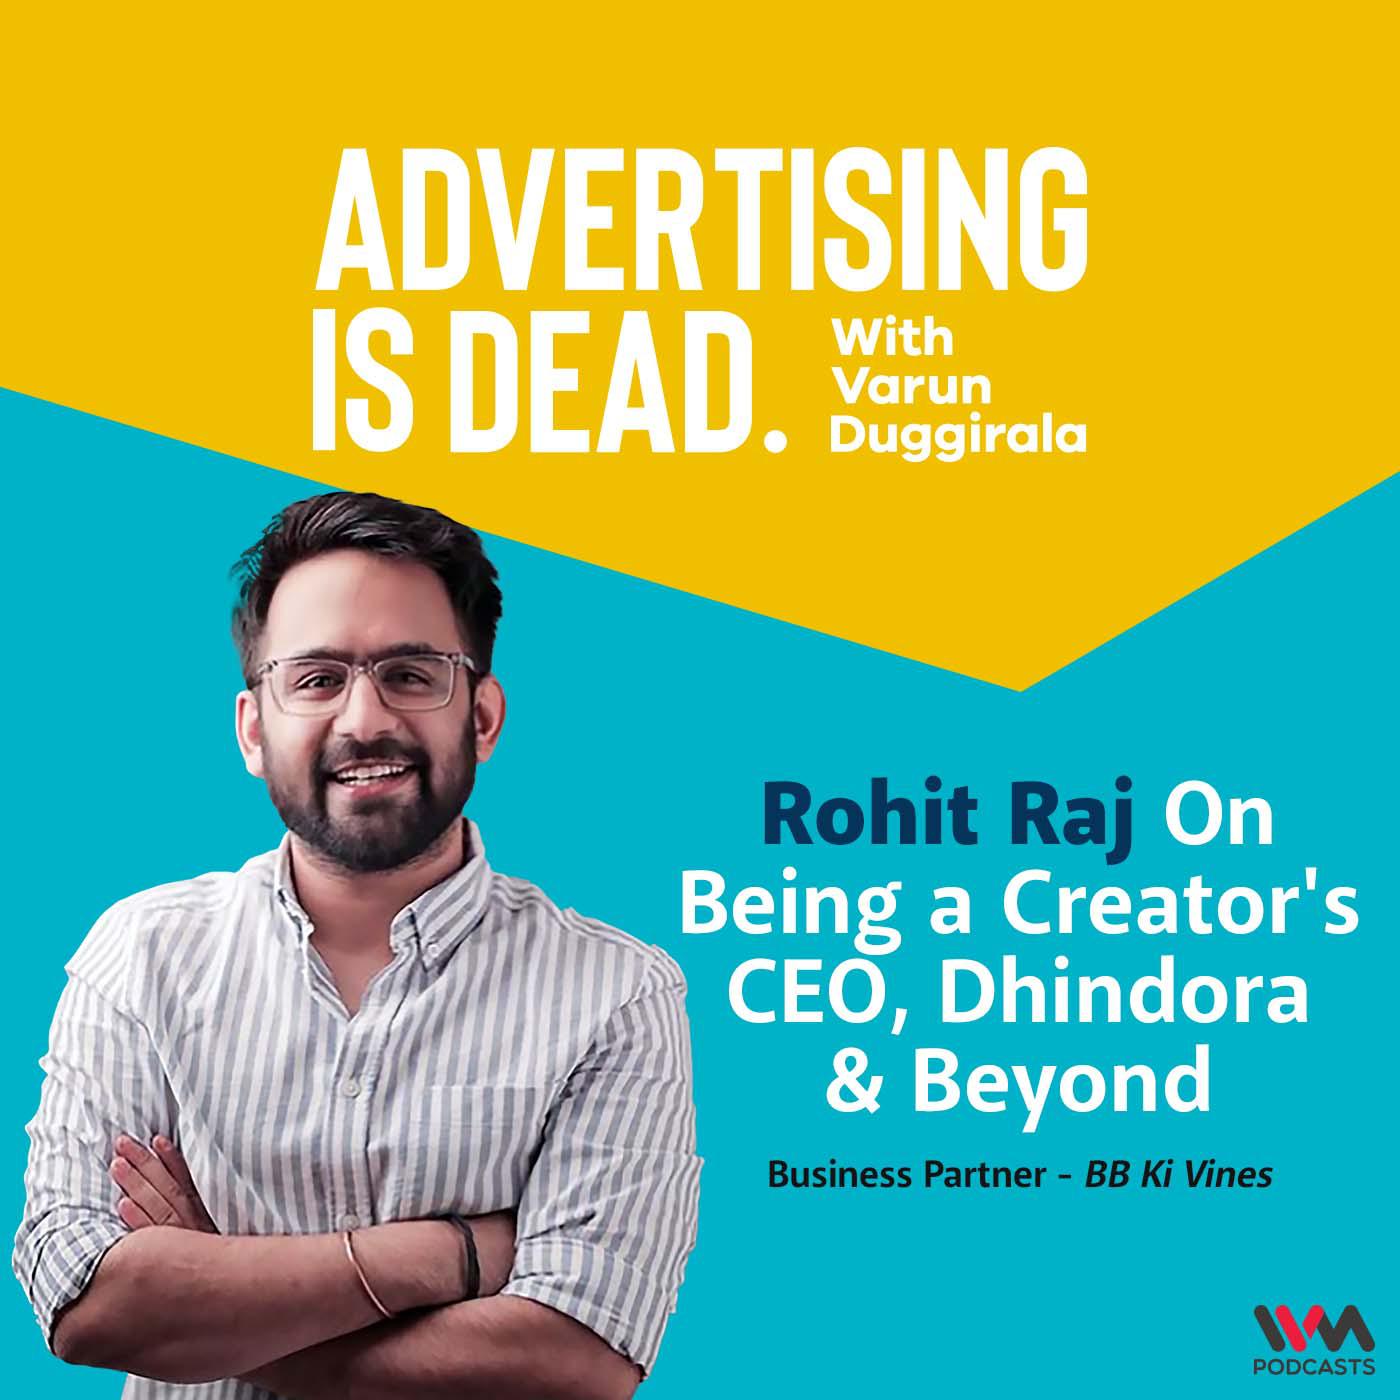 Rohit Raj On Being a Creator's CEO, Dhindora & Beyond